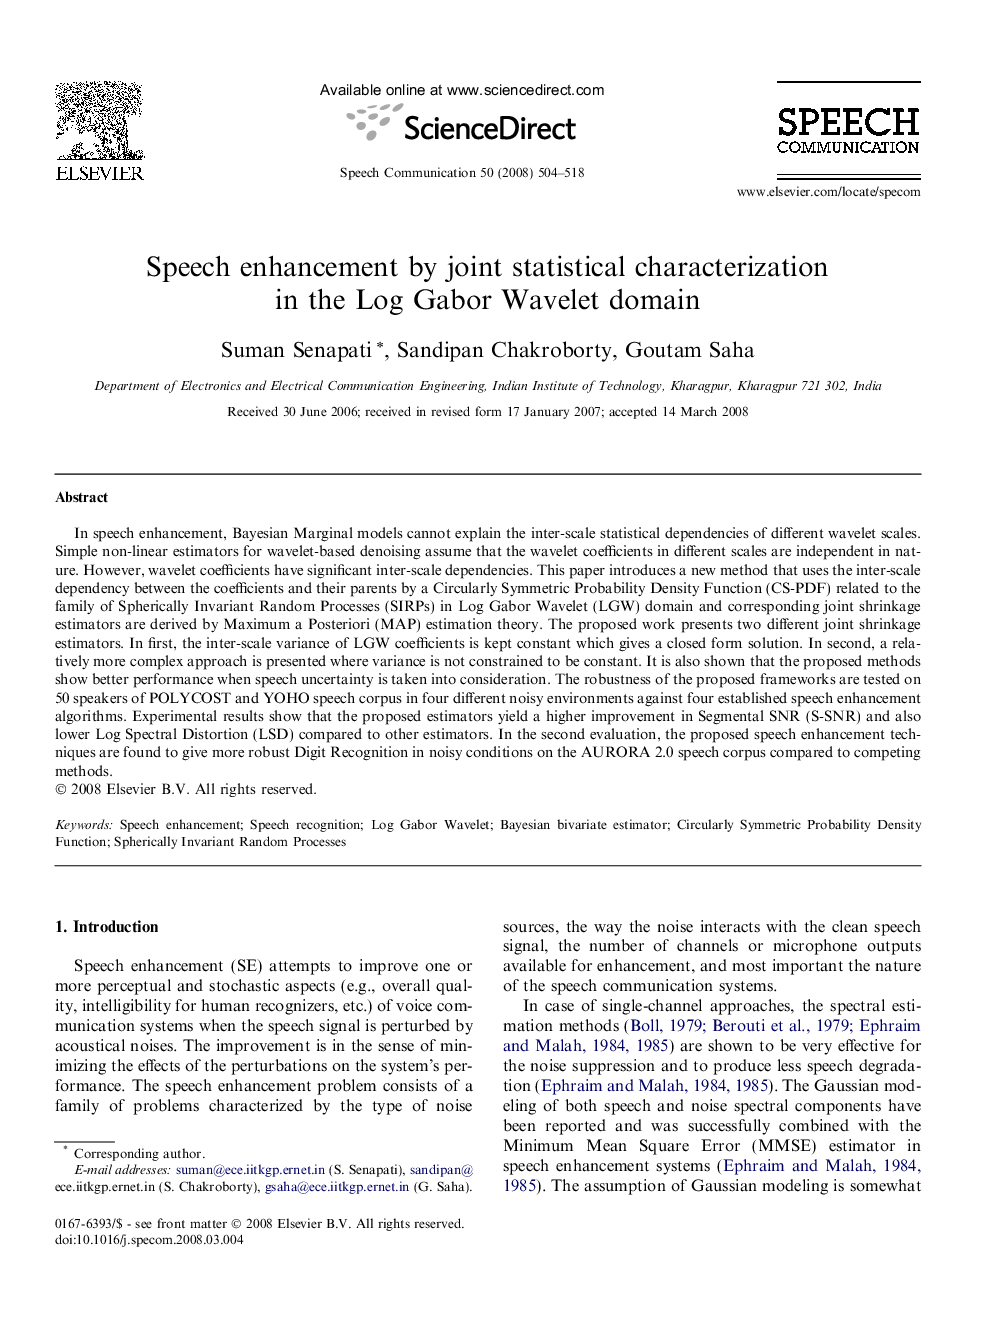 Speech enhancement by joint statistical characterization in the Log Gabor Wavelet domain